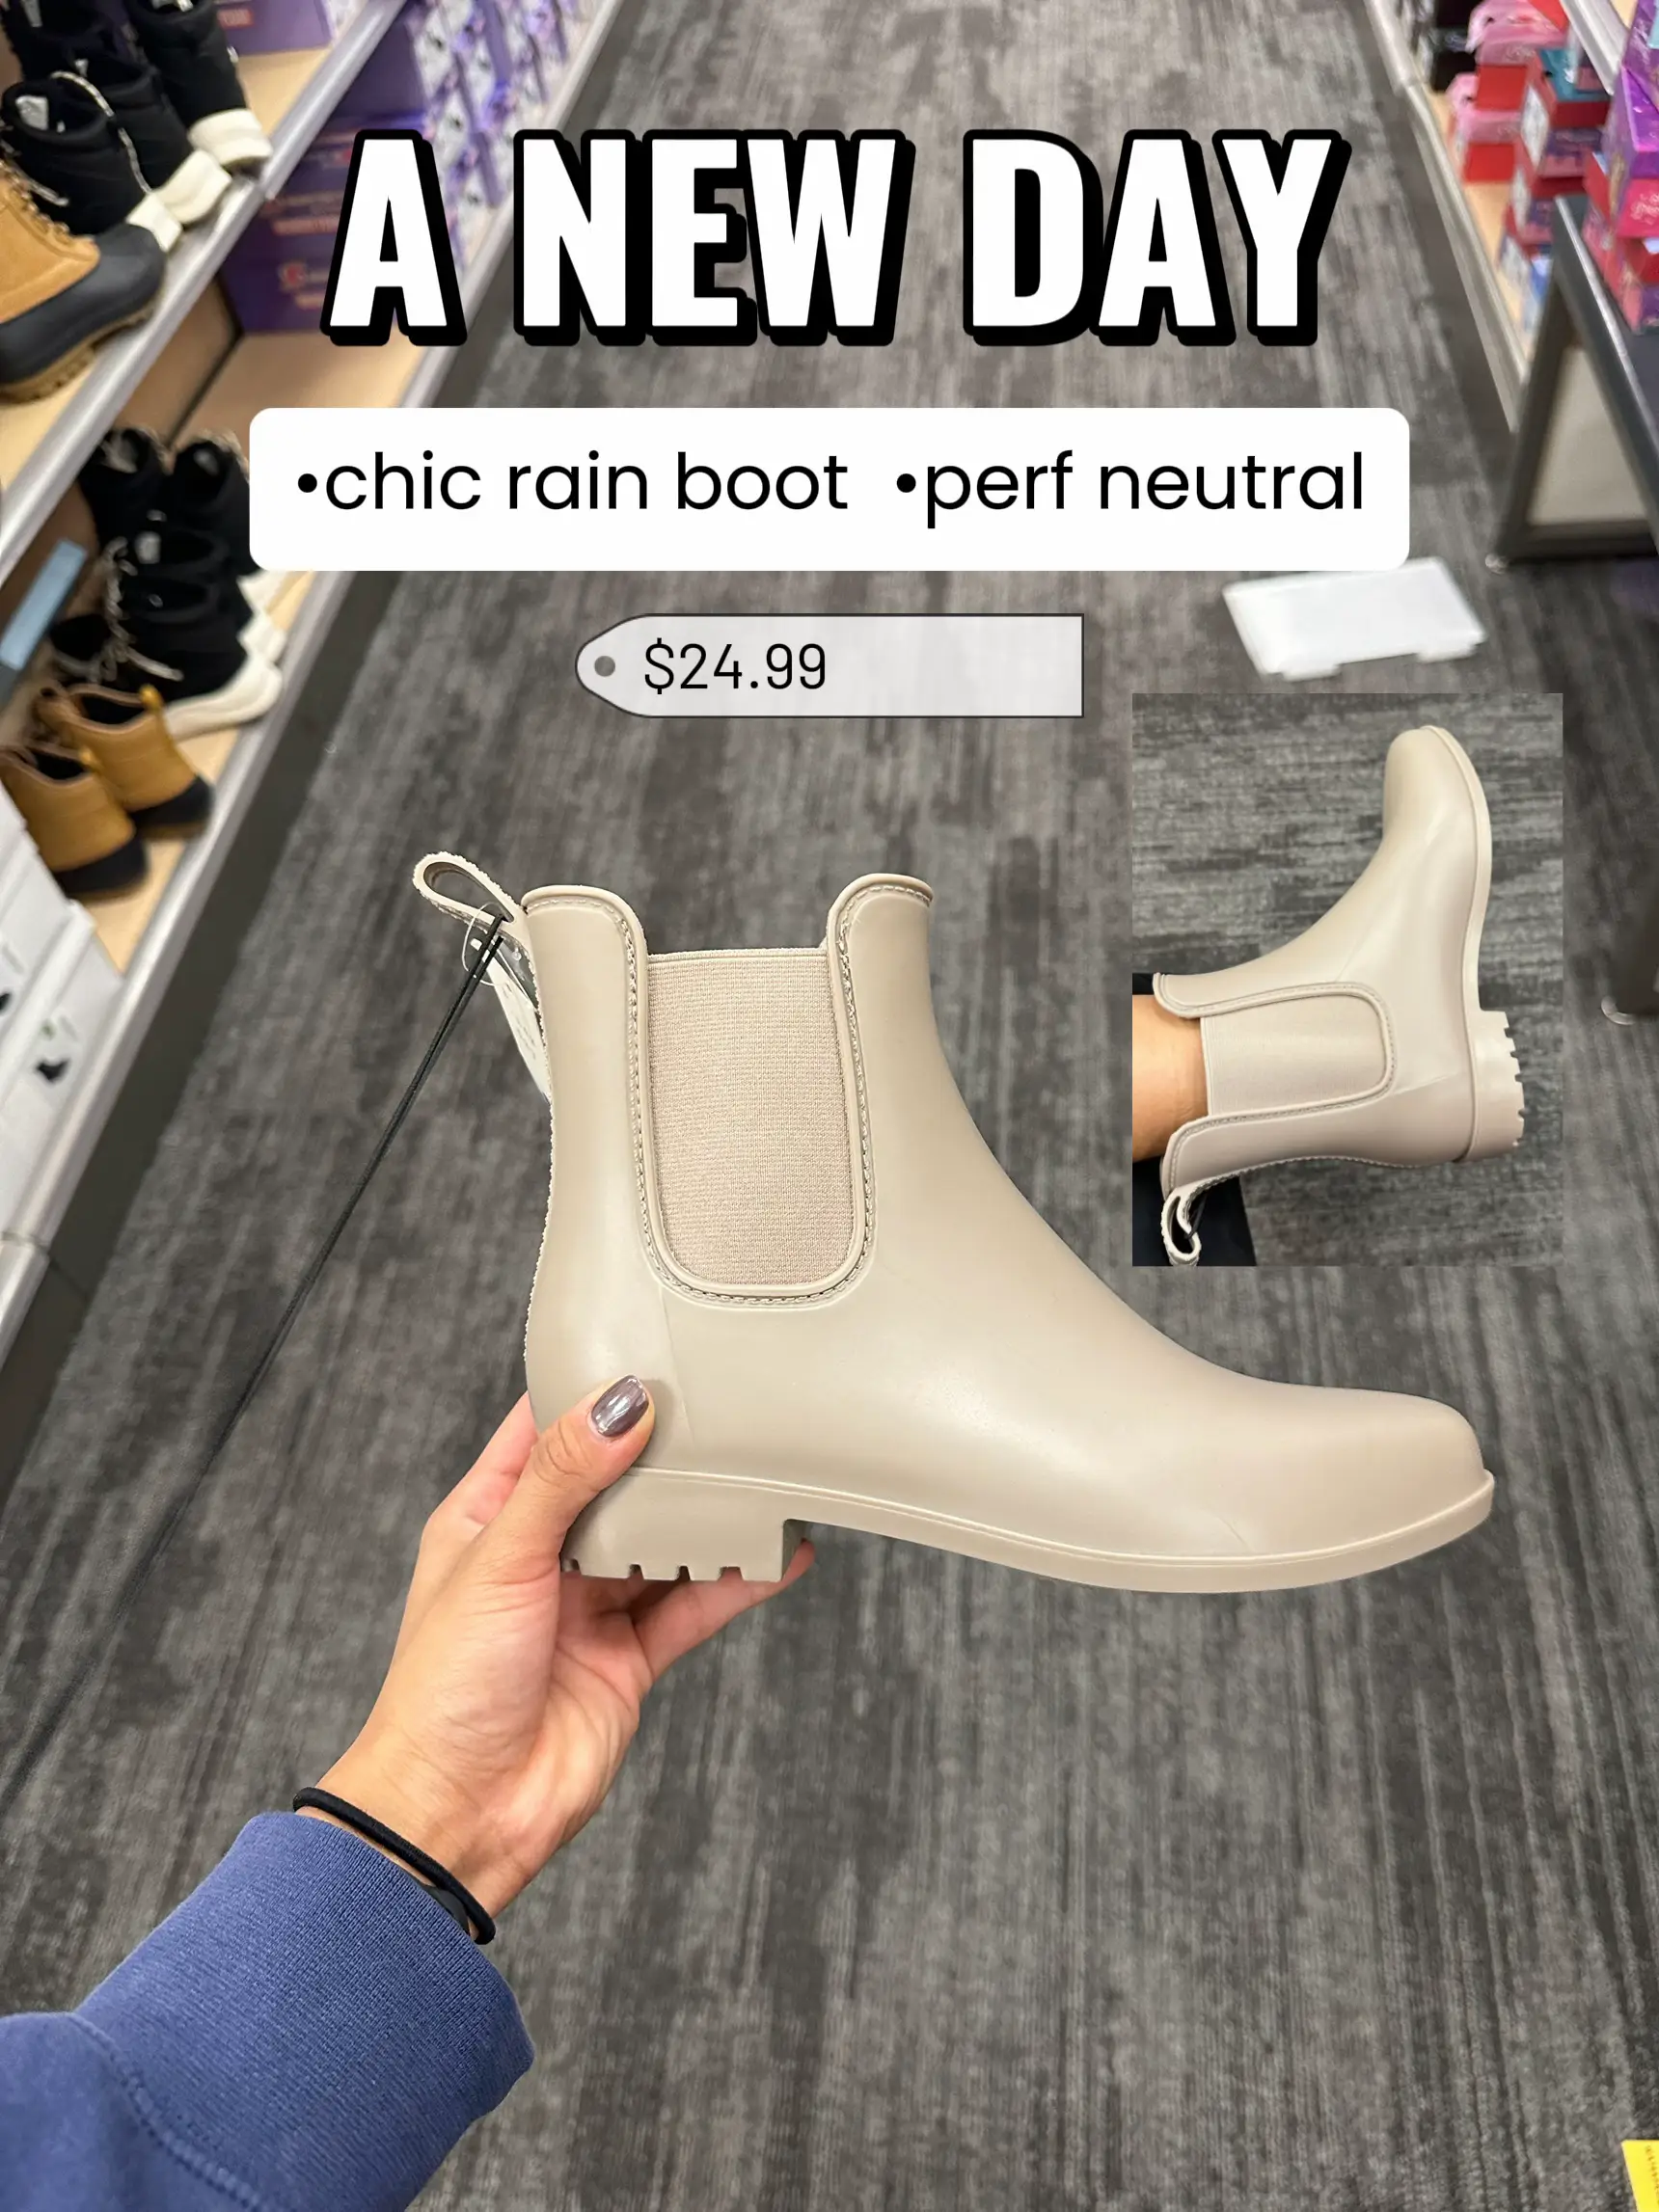  A person is holding a pair of boots in a store.